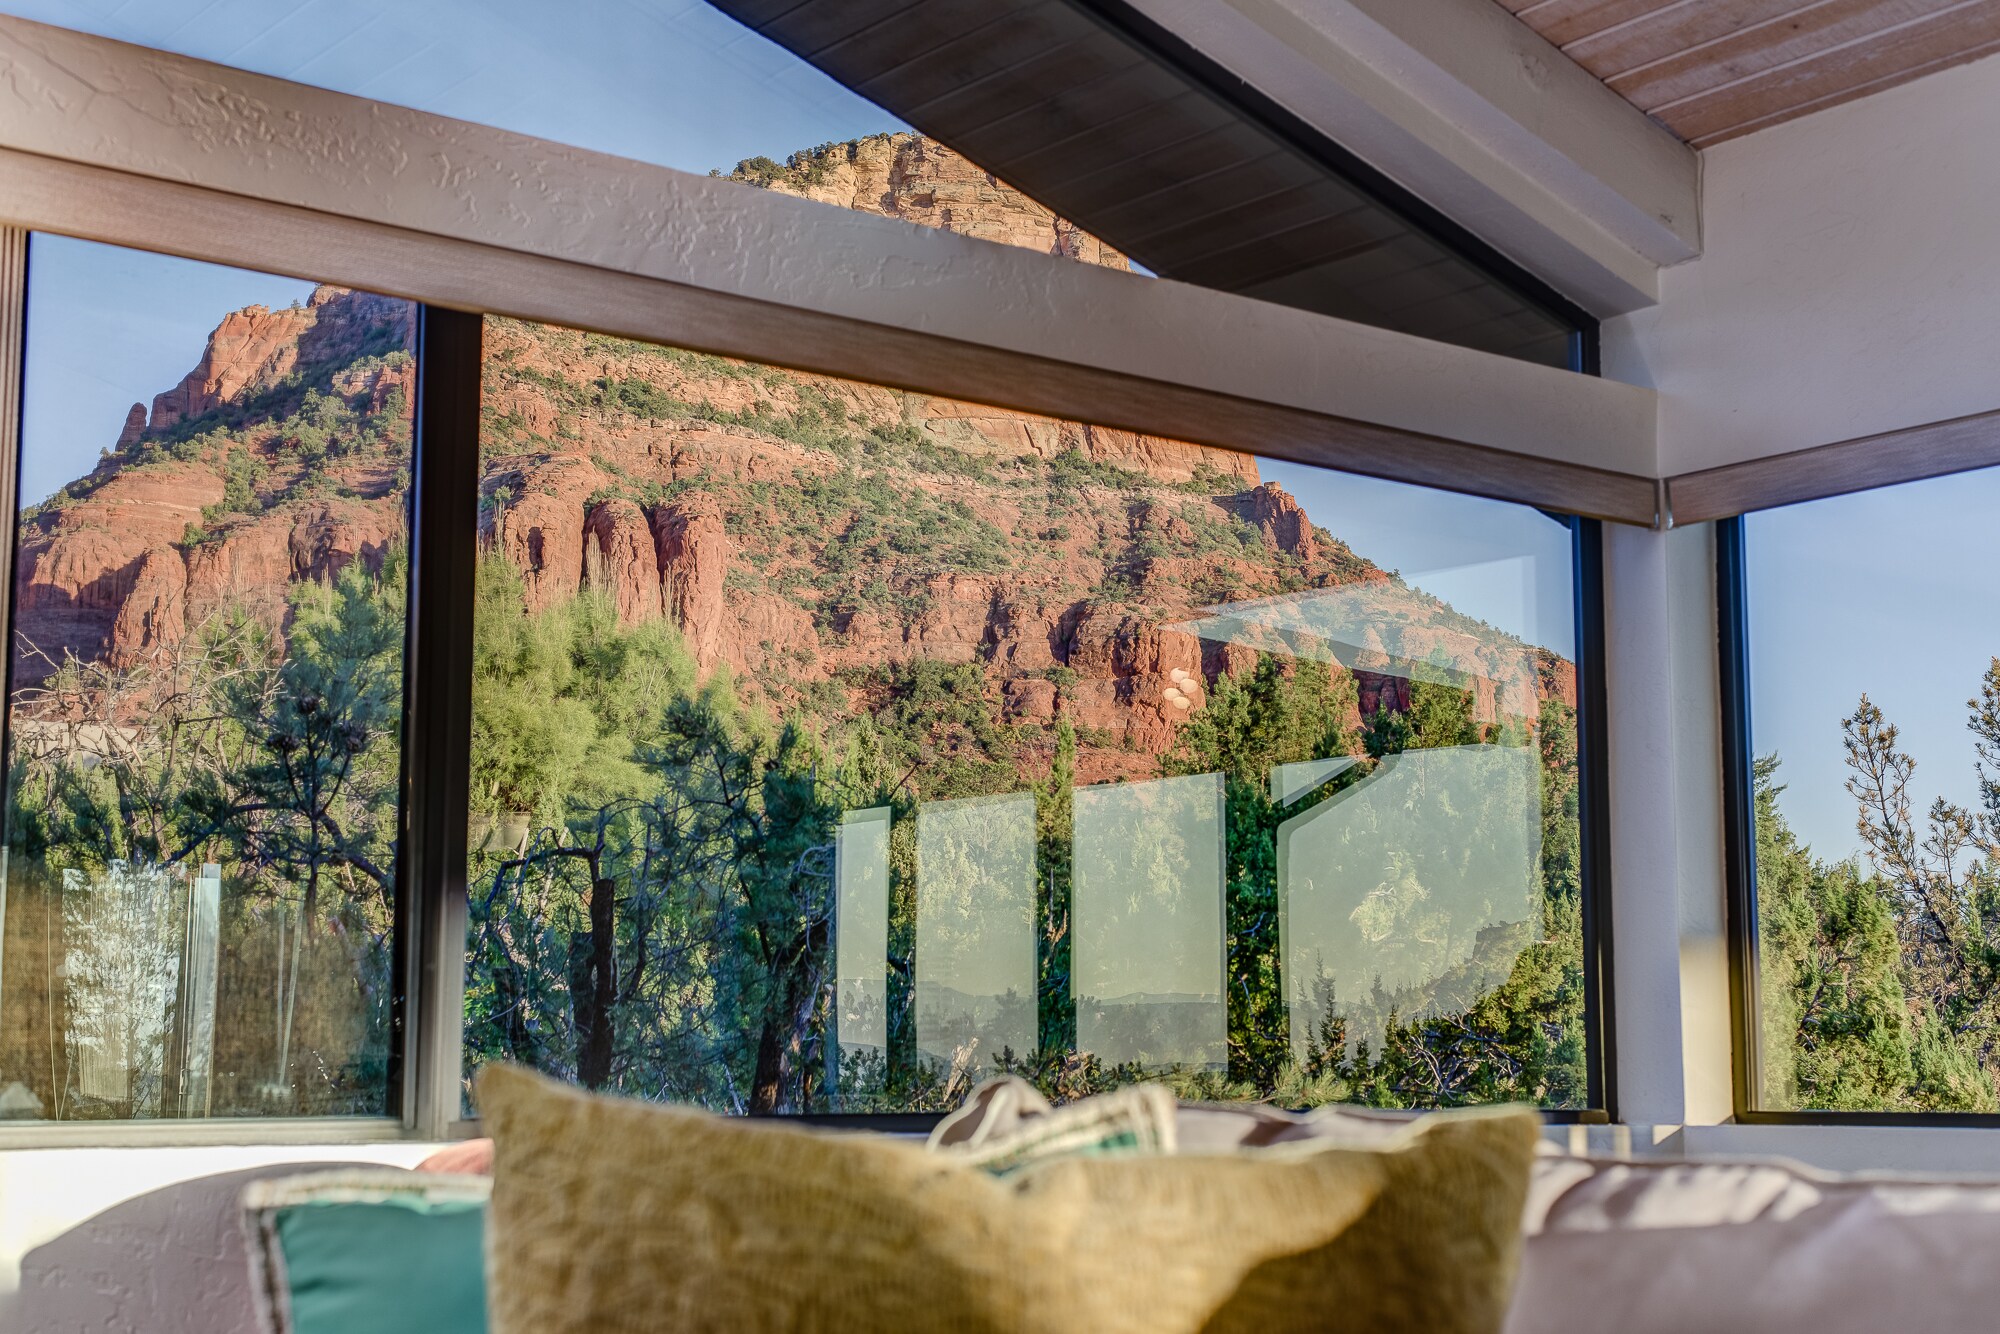 Amazing Red Rock Views from Inside the House